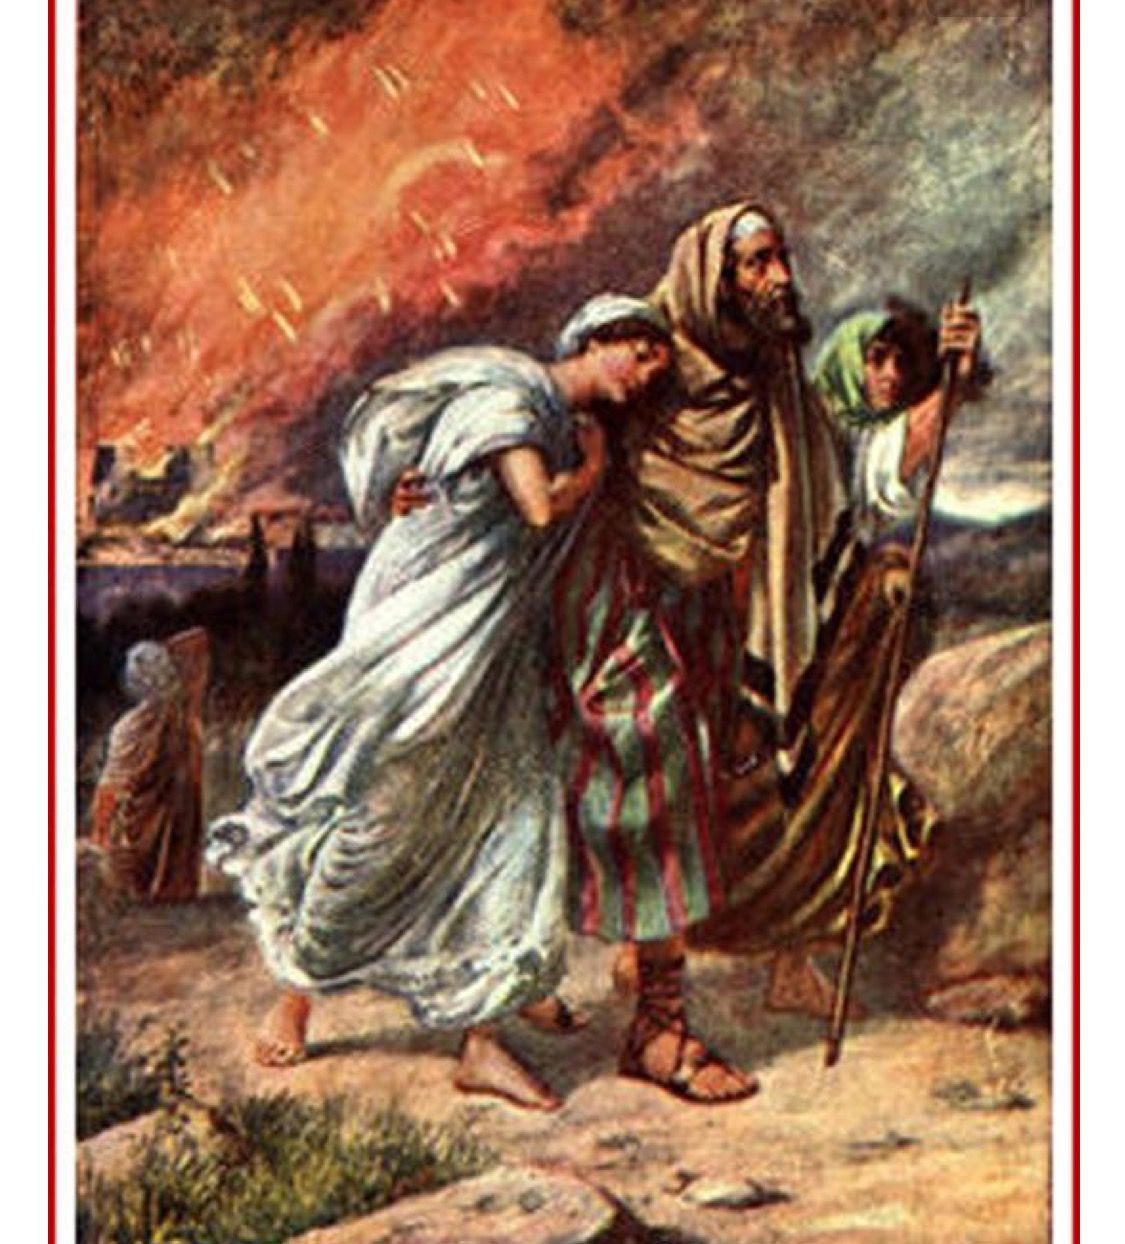 Lot and his daughters escaping the destruction of Sodom and Gomorrah ...